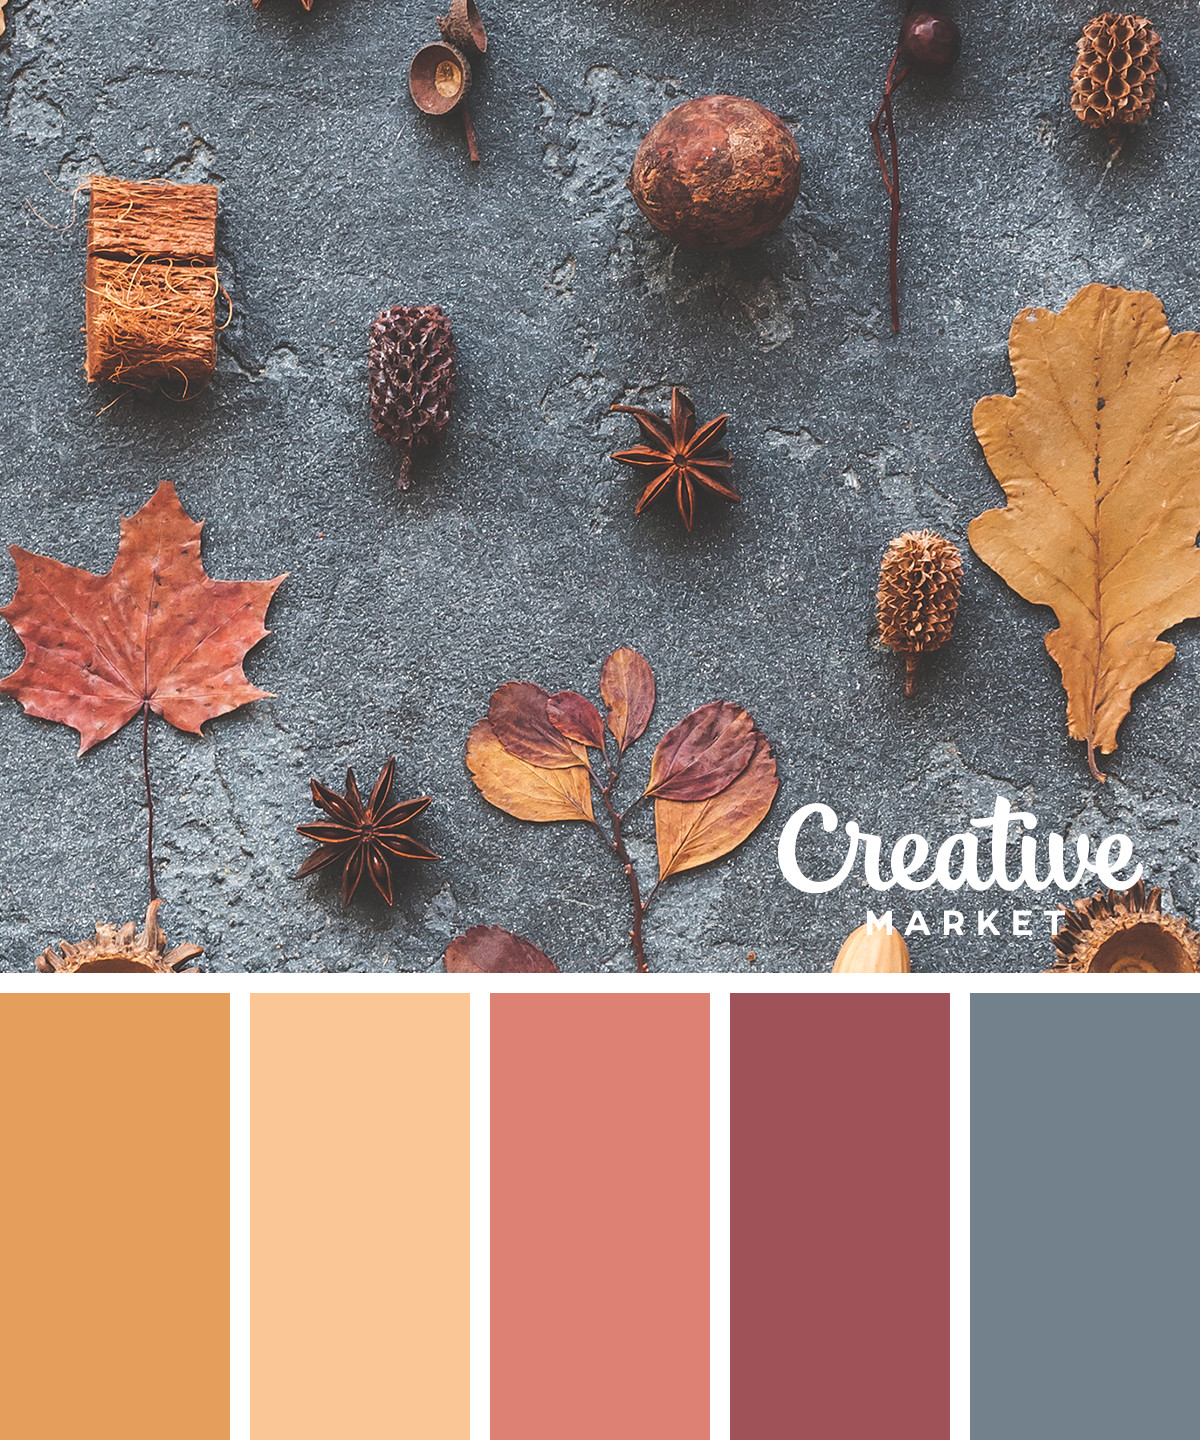 10 elegant color palettes to inspire you